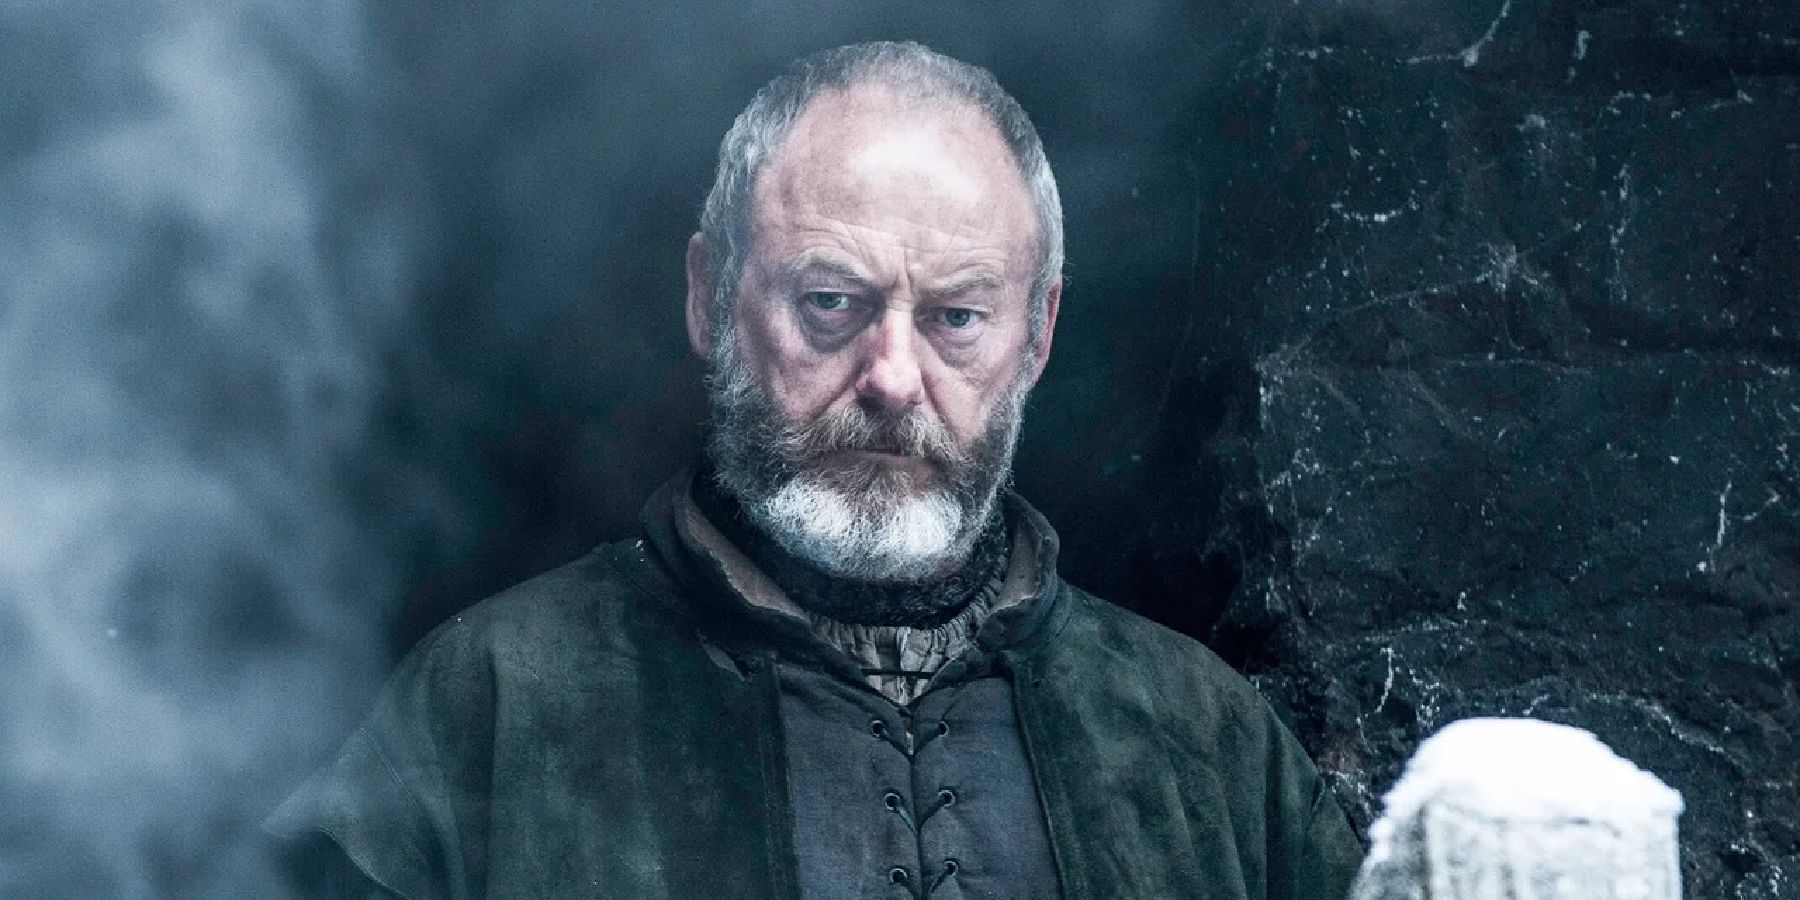 Davos Seaworth played by Liam Cunningham in Game of Thrones.